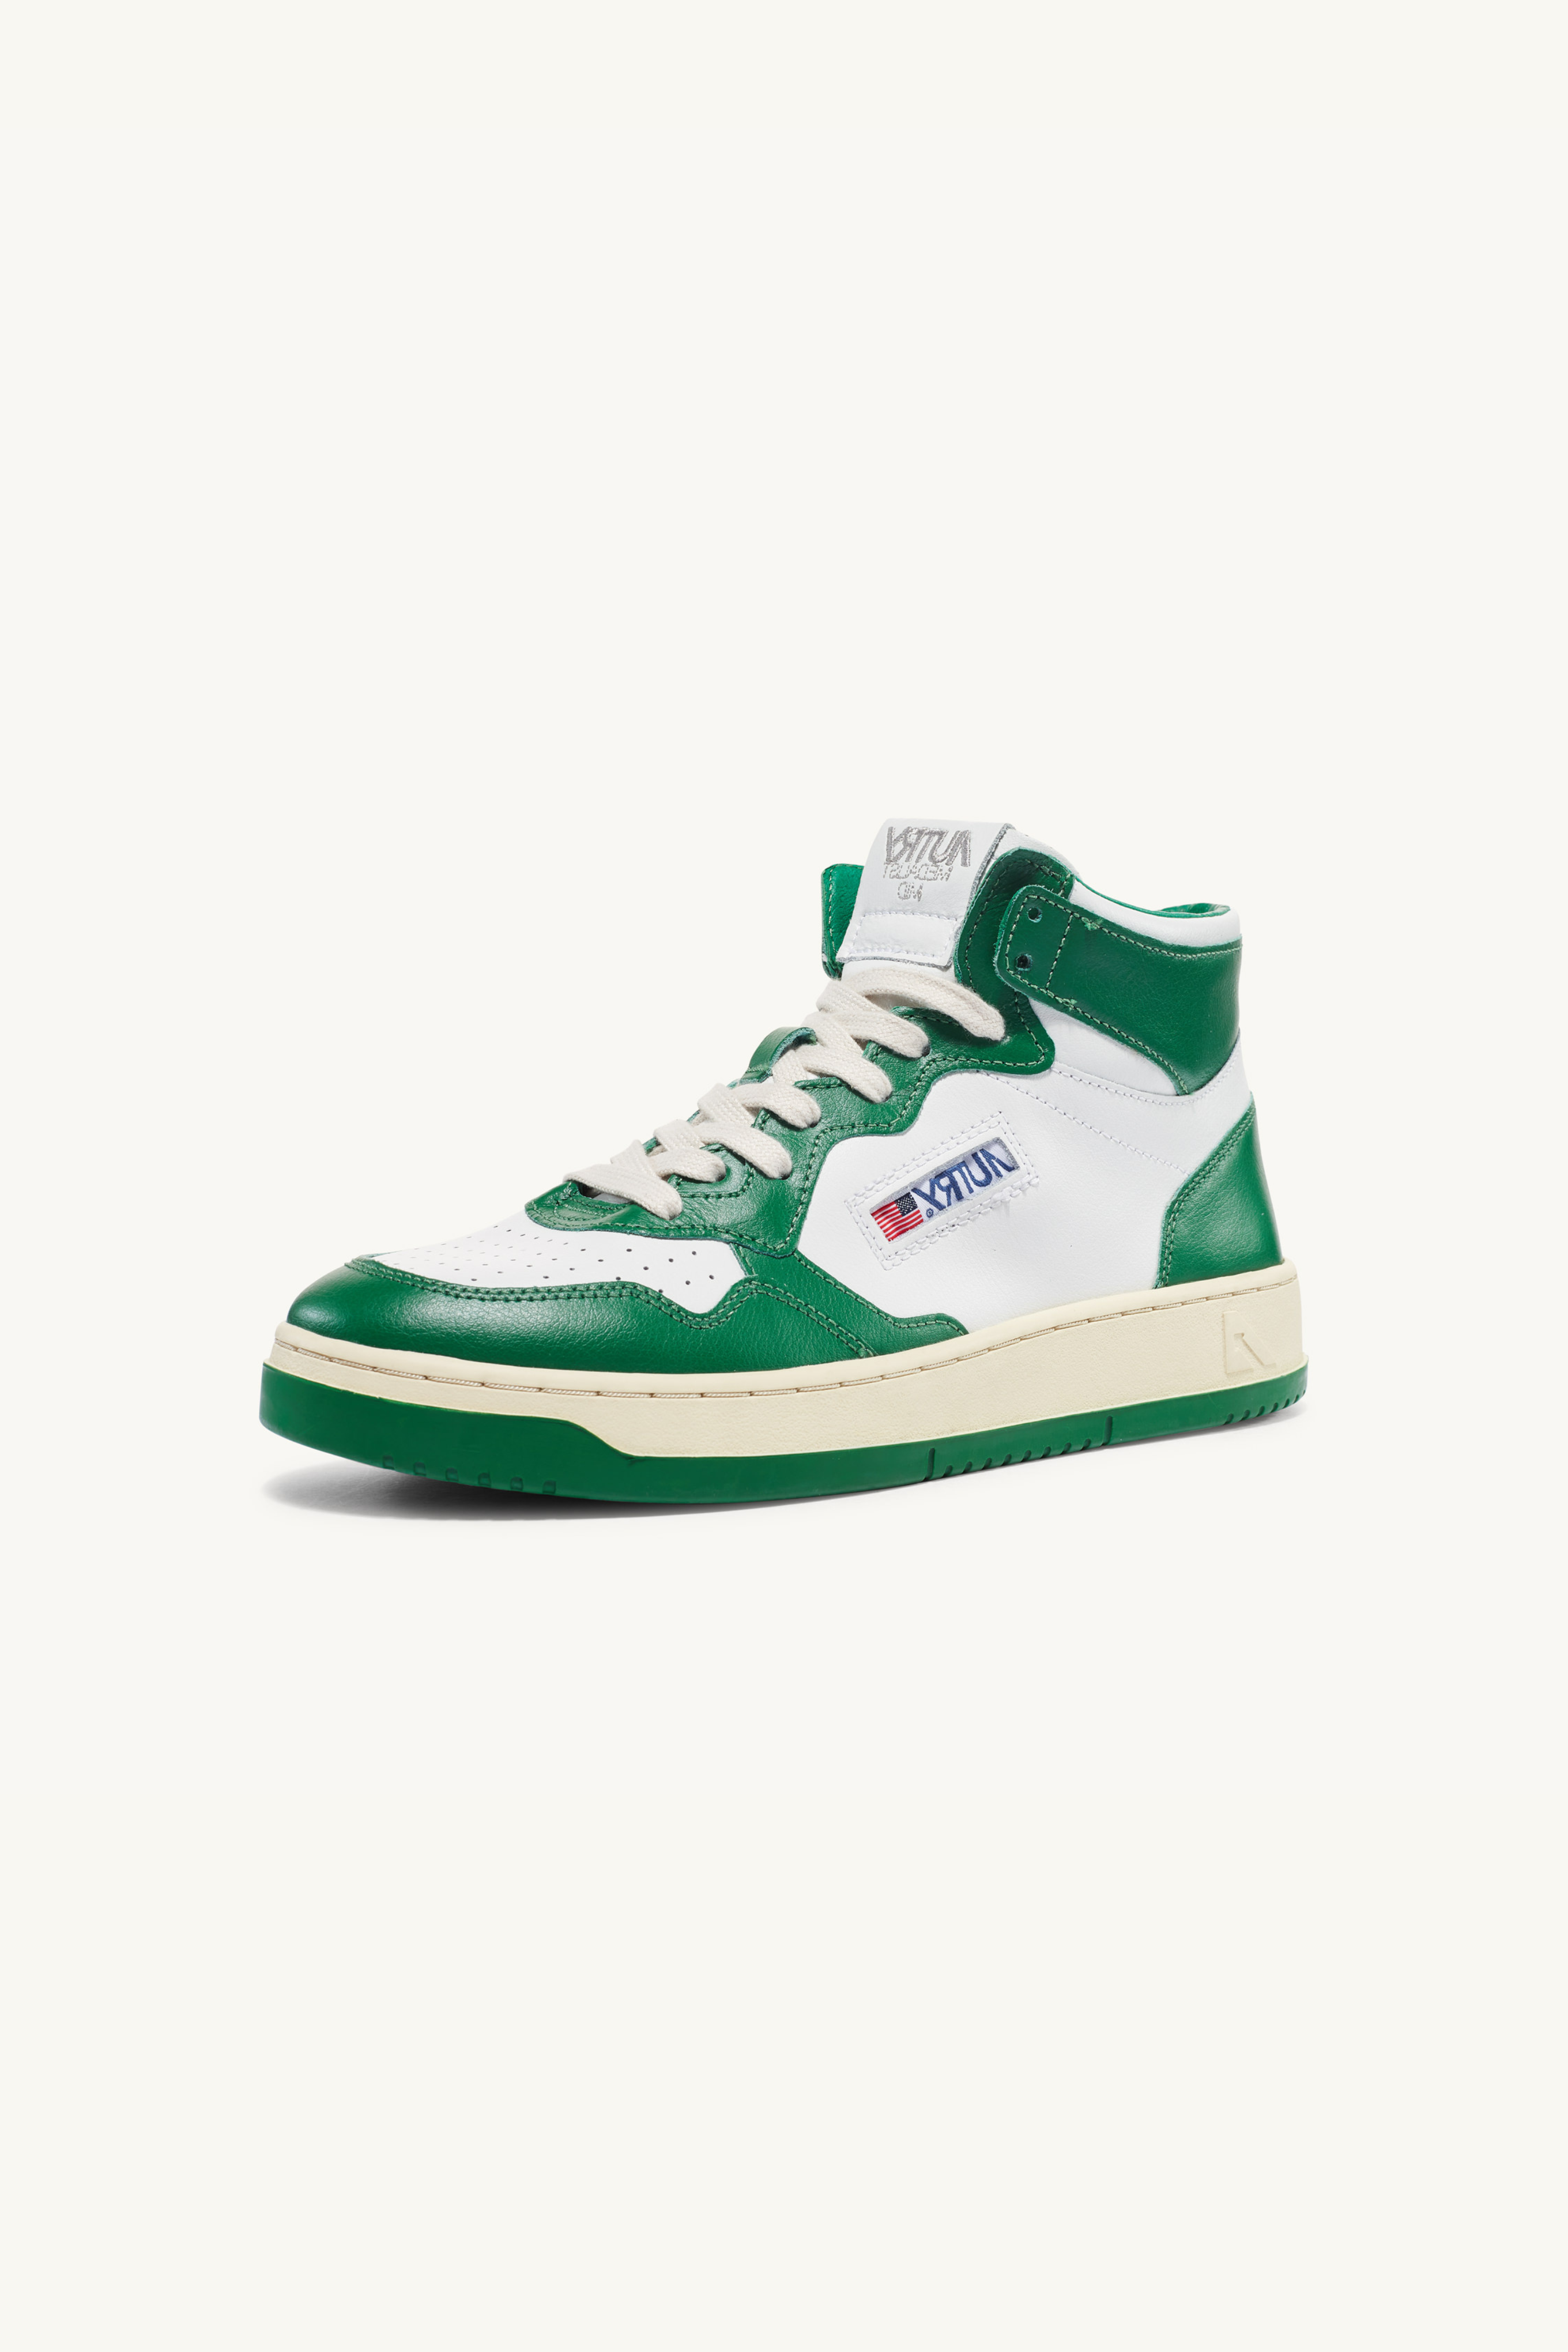 AUMW-WB03 - MEDALIST MID SNEAKERS IN TWO-TONE LEATHER COLOR WHITE AND GREEN